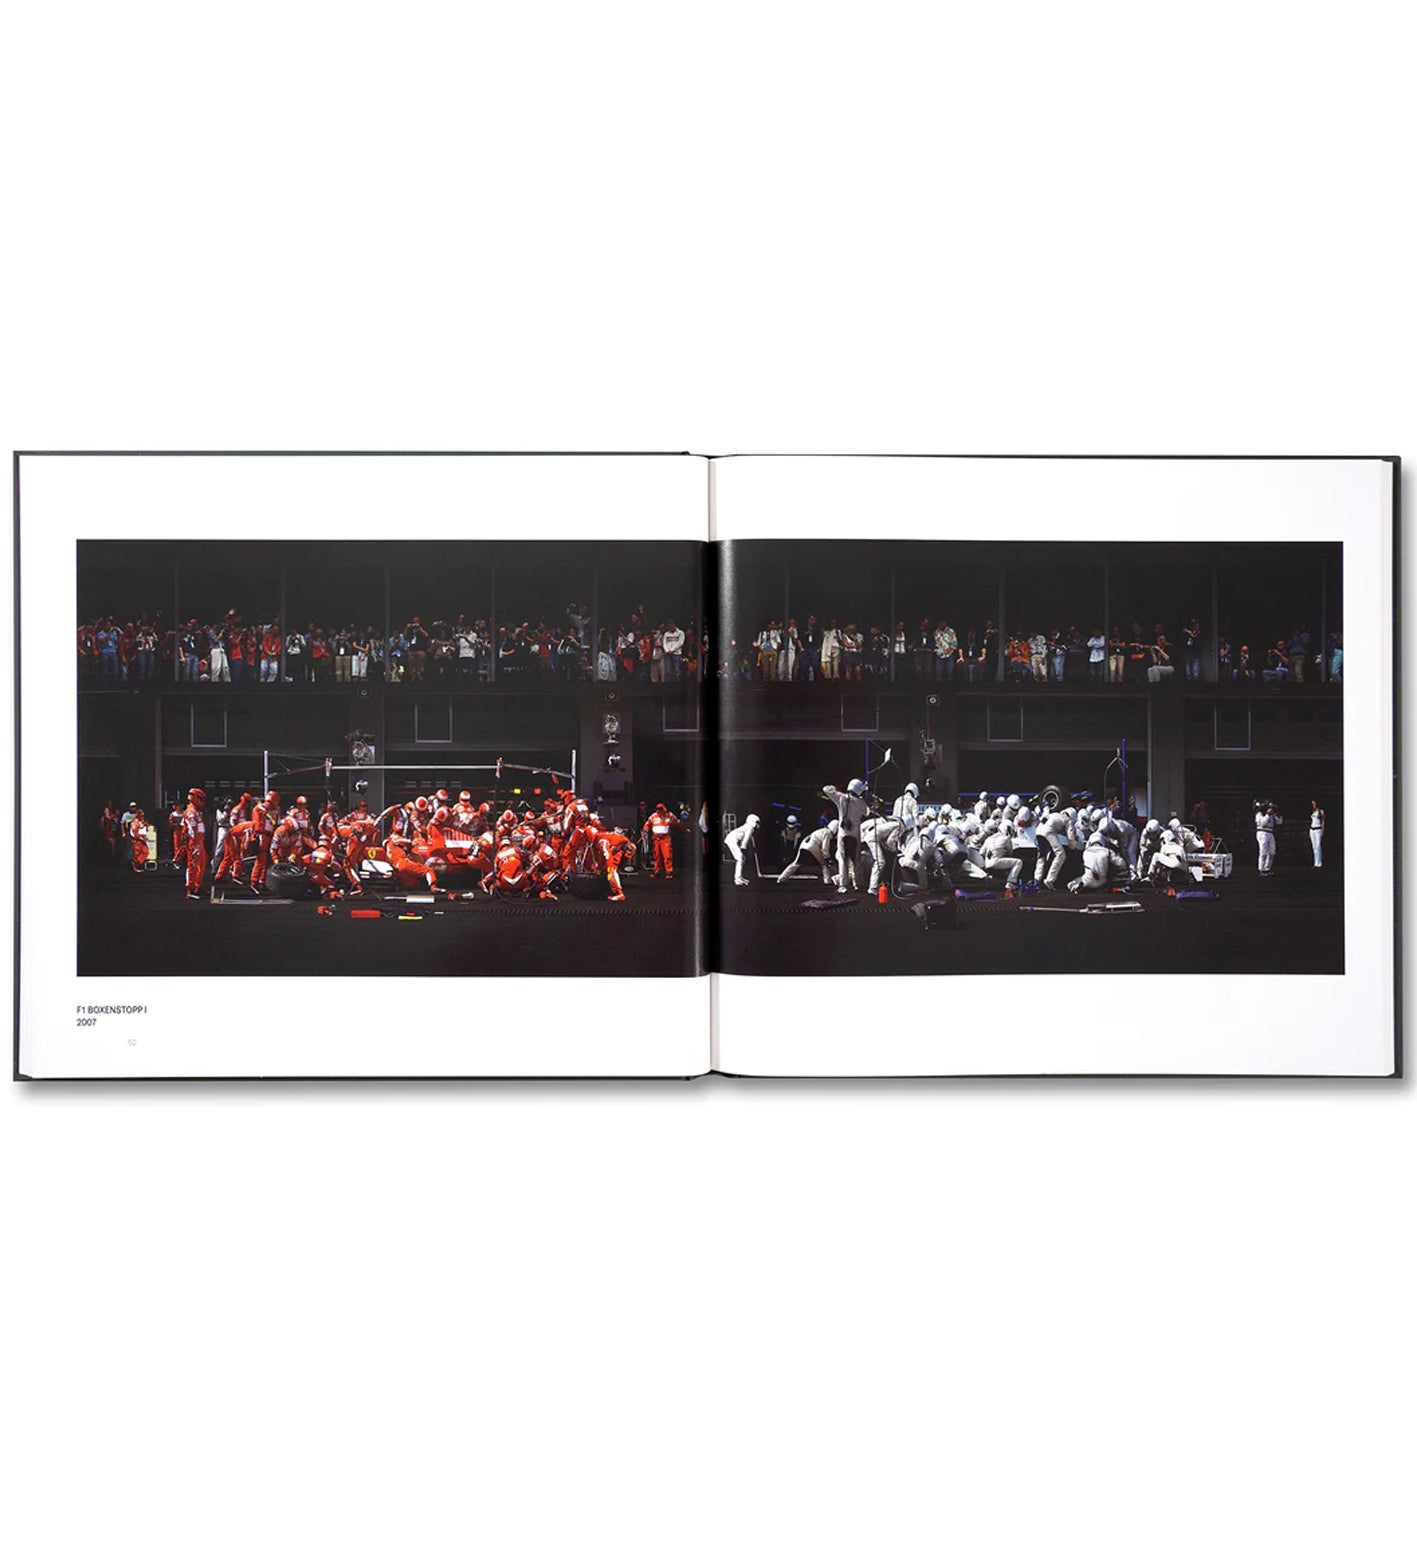 Andreas Gursky: Visual Spaces of Today